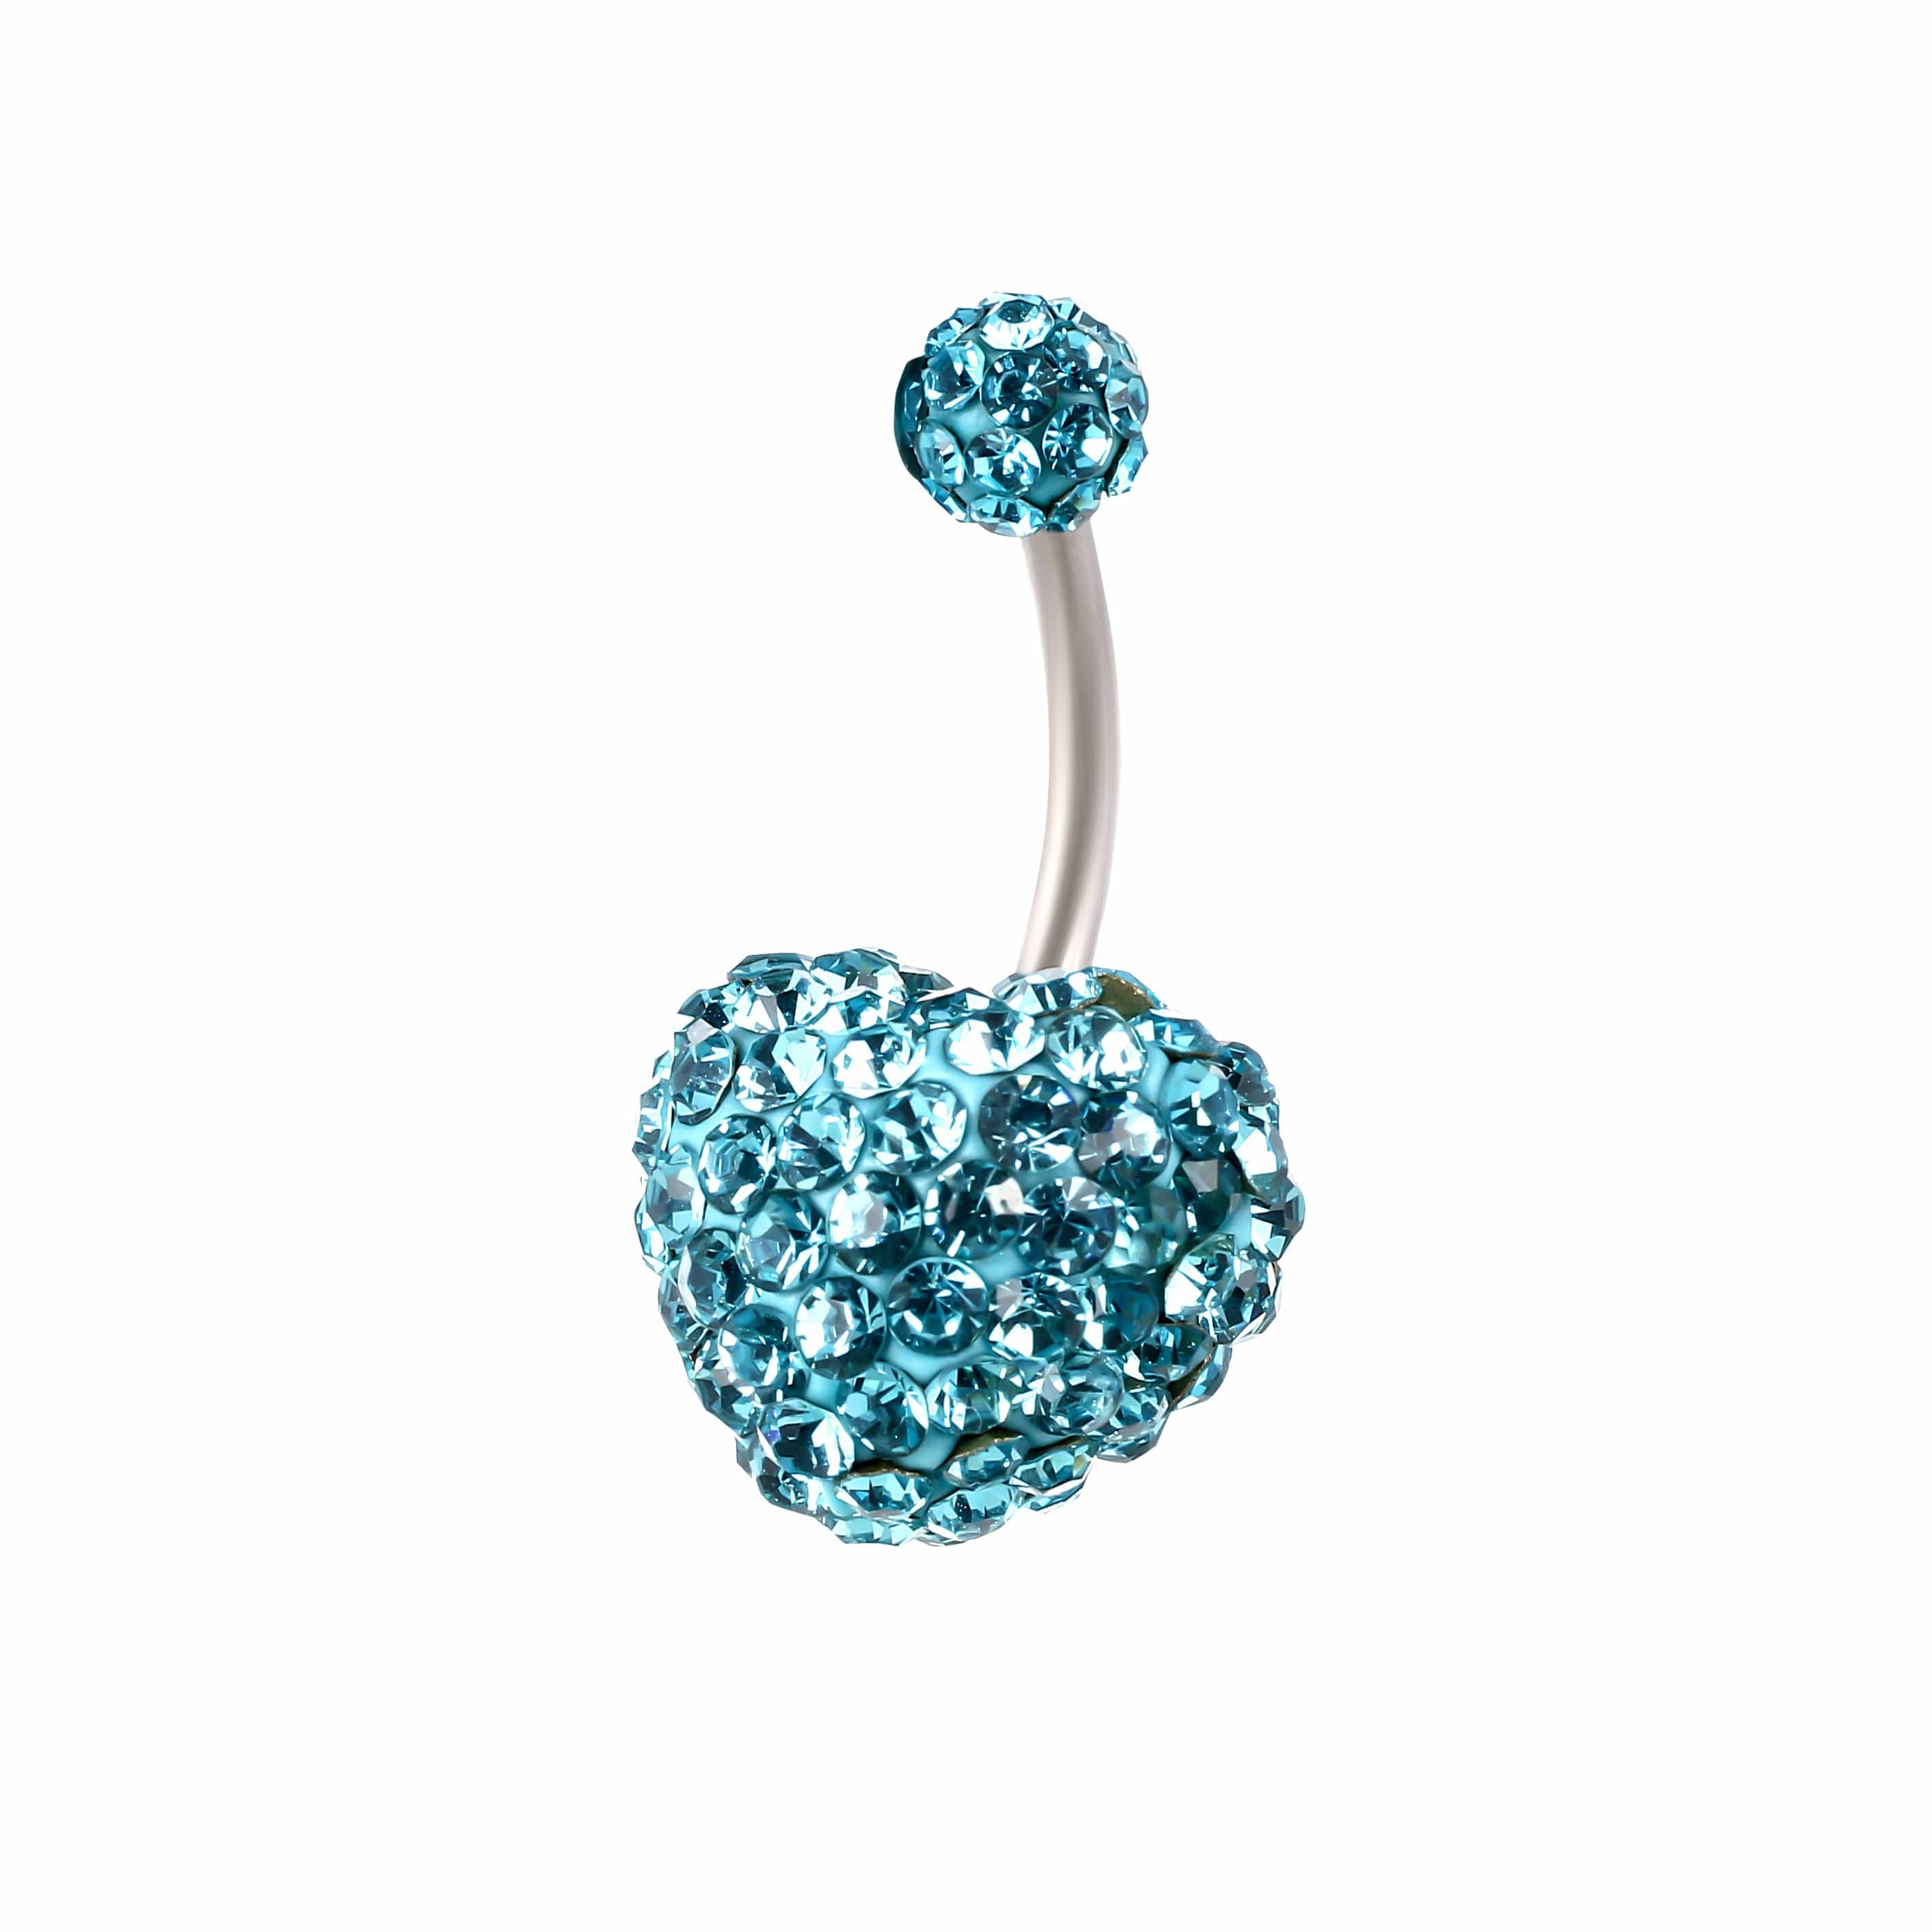 PIERCING NAVEL CUORE STRASS.